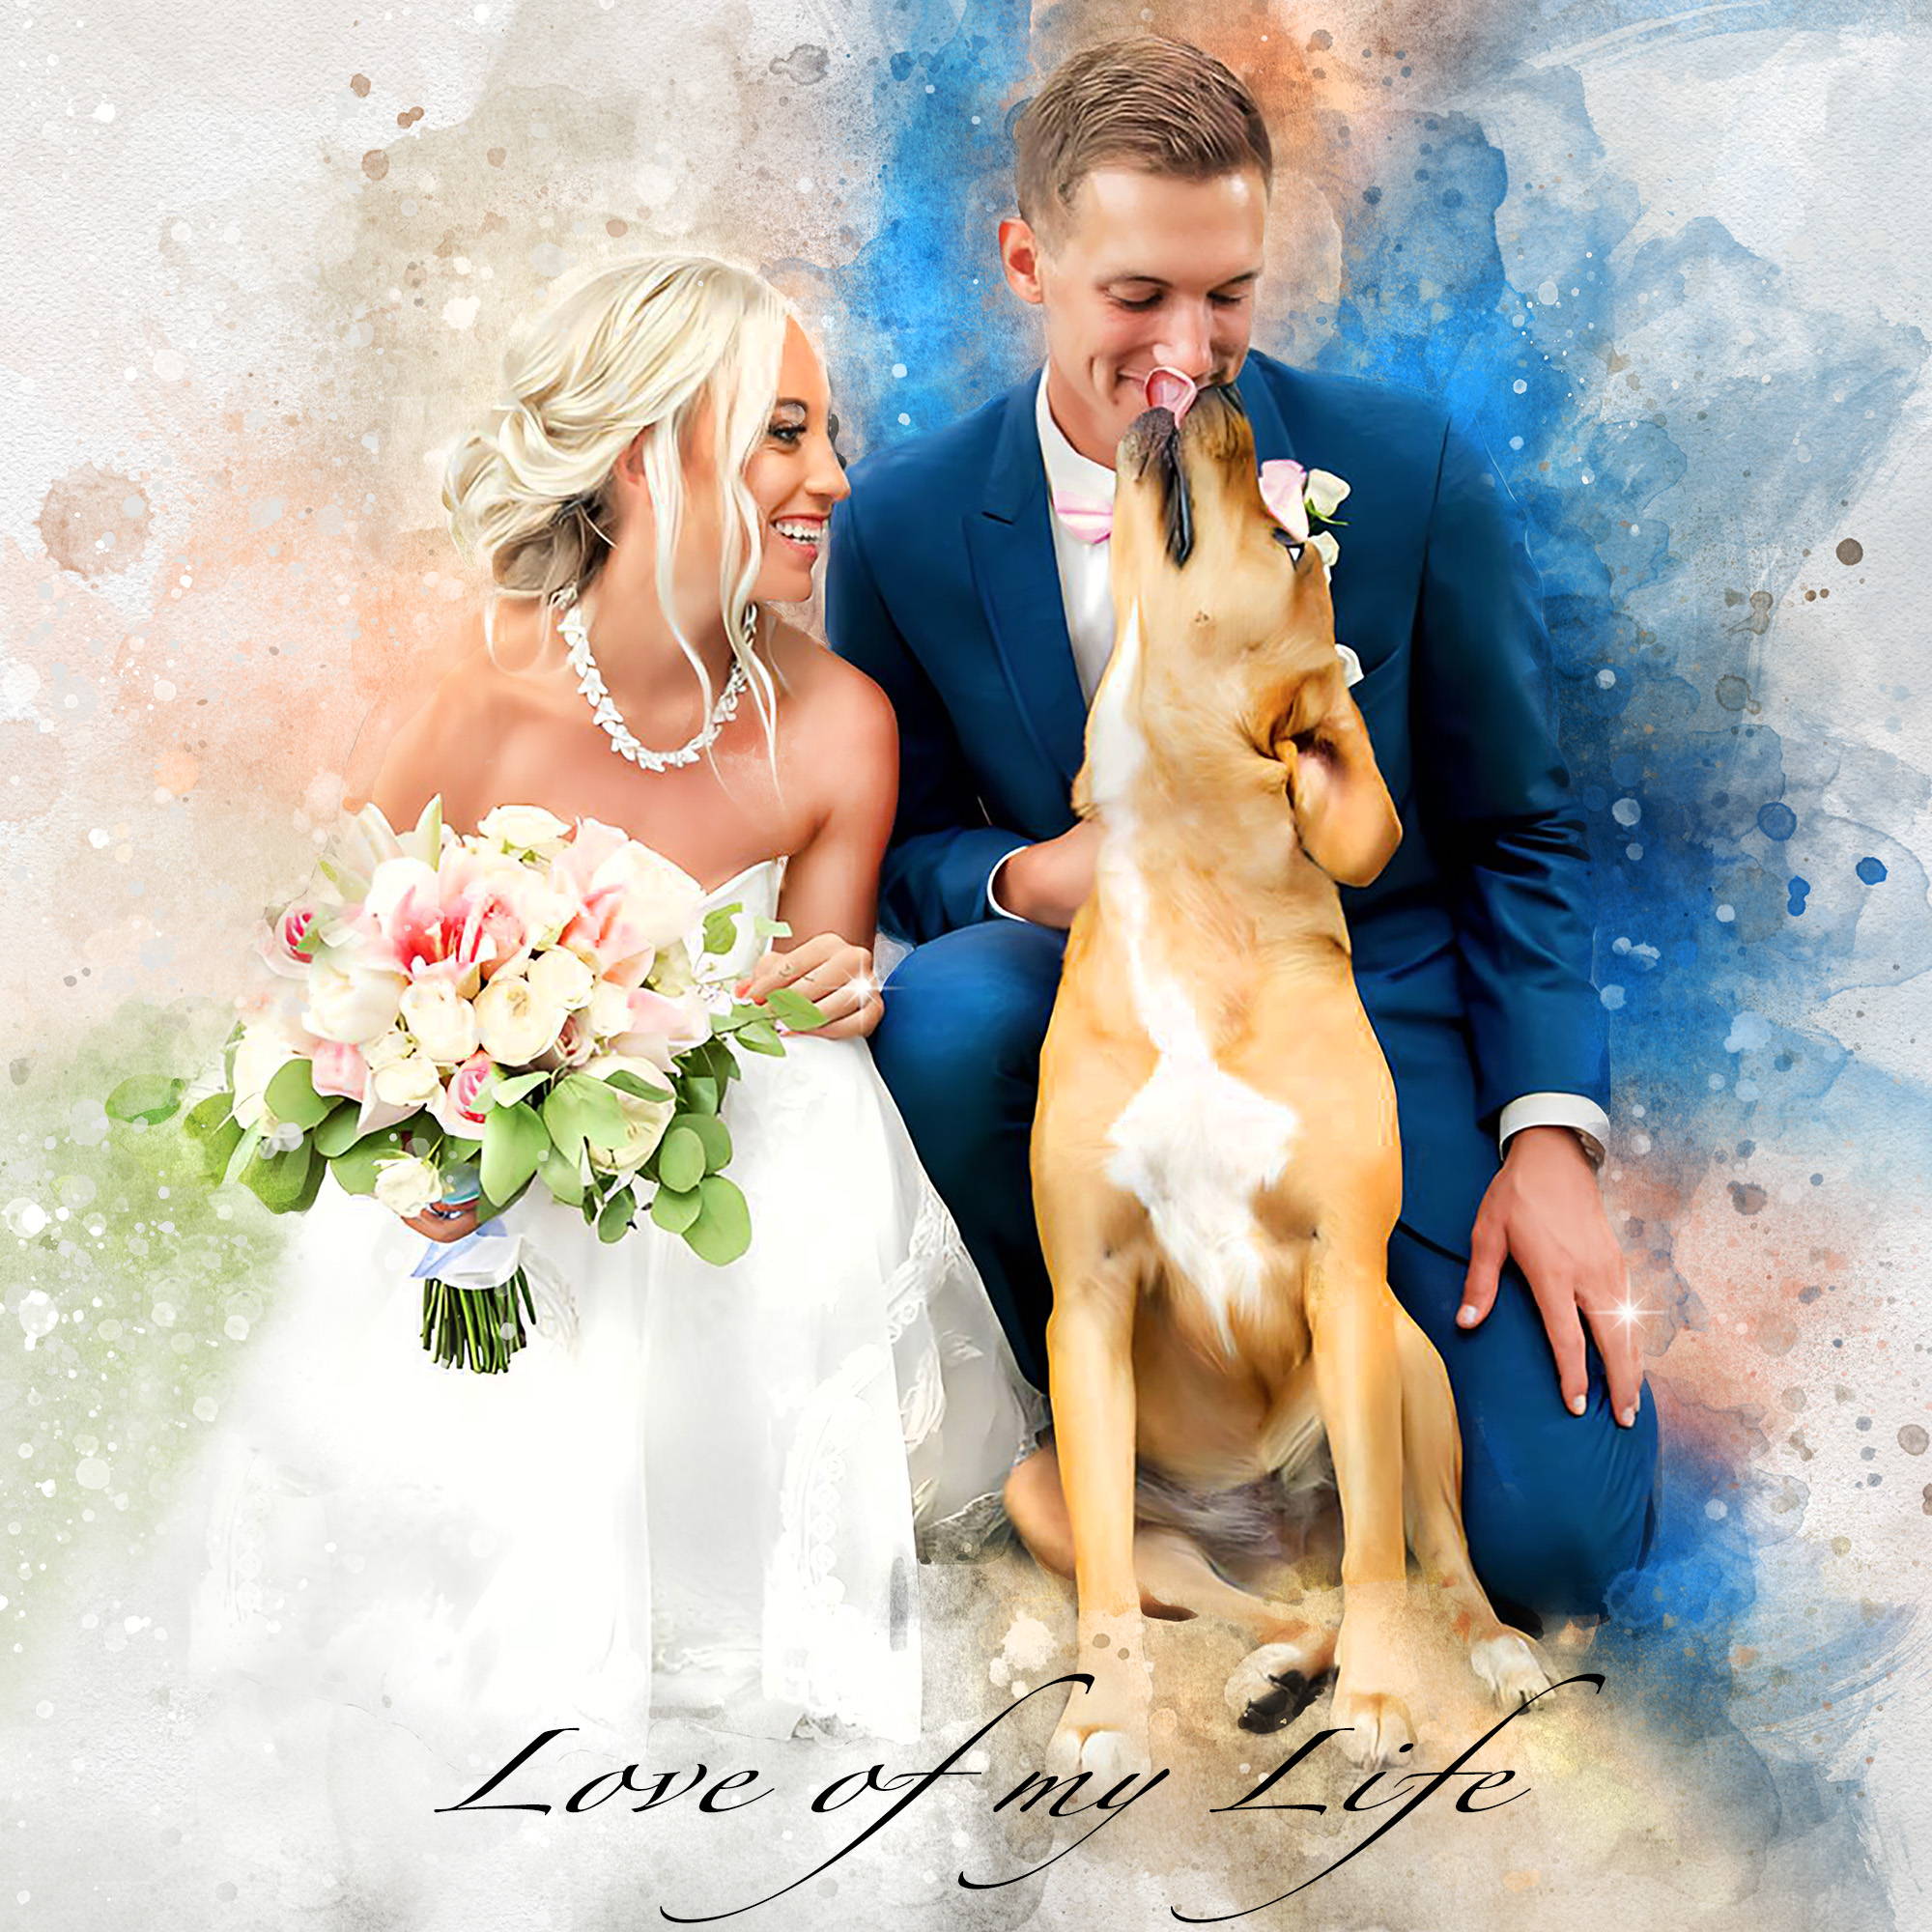 Gift for Couple, Gift for boyfriend, Portrait from Photo, Canvas Painting, Couple Painting, Gift for wife, Gift for Husband, Gift for him, Gift for her, Gift for Girlfriend, I love you gift, Valentines Gift, Couple Gift, Wedding Portrait with Dog, Anniversary Gift- From PicToArt